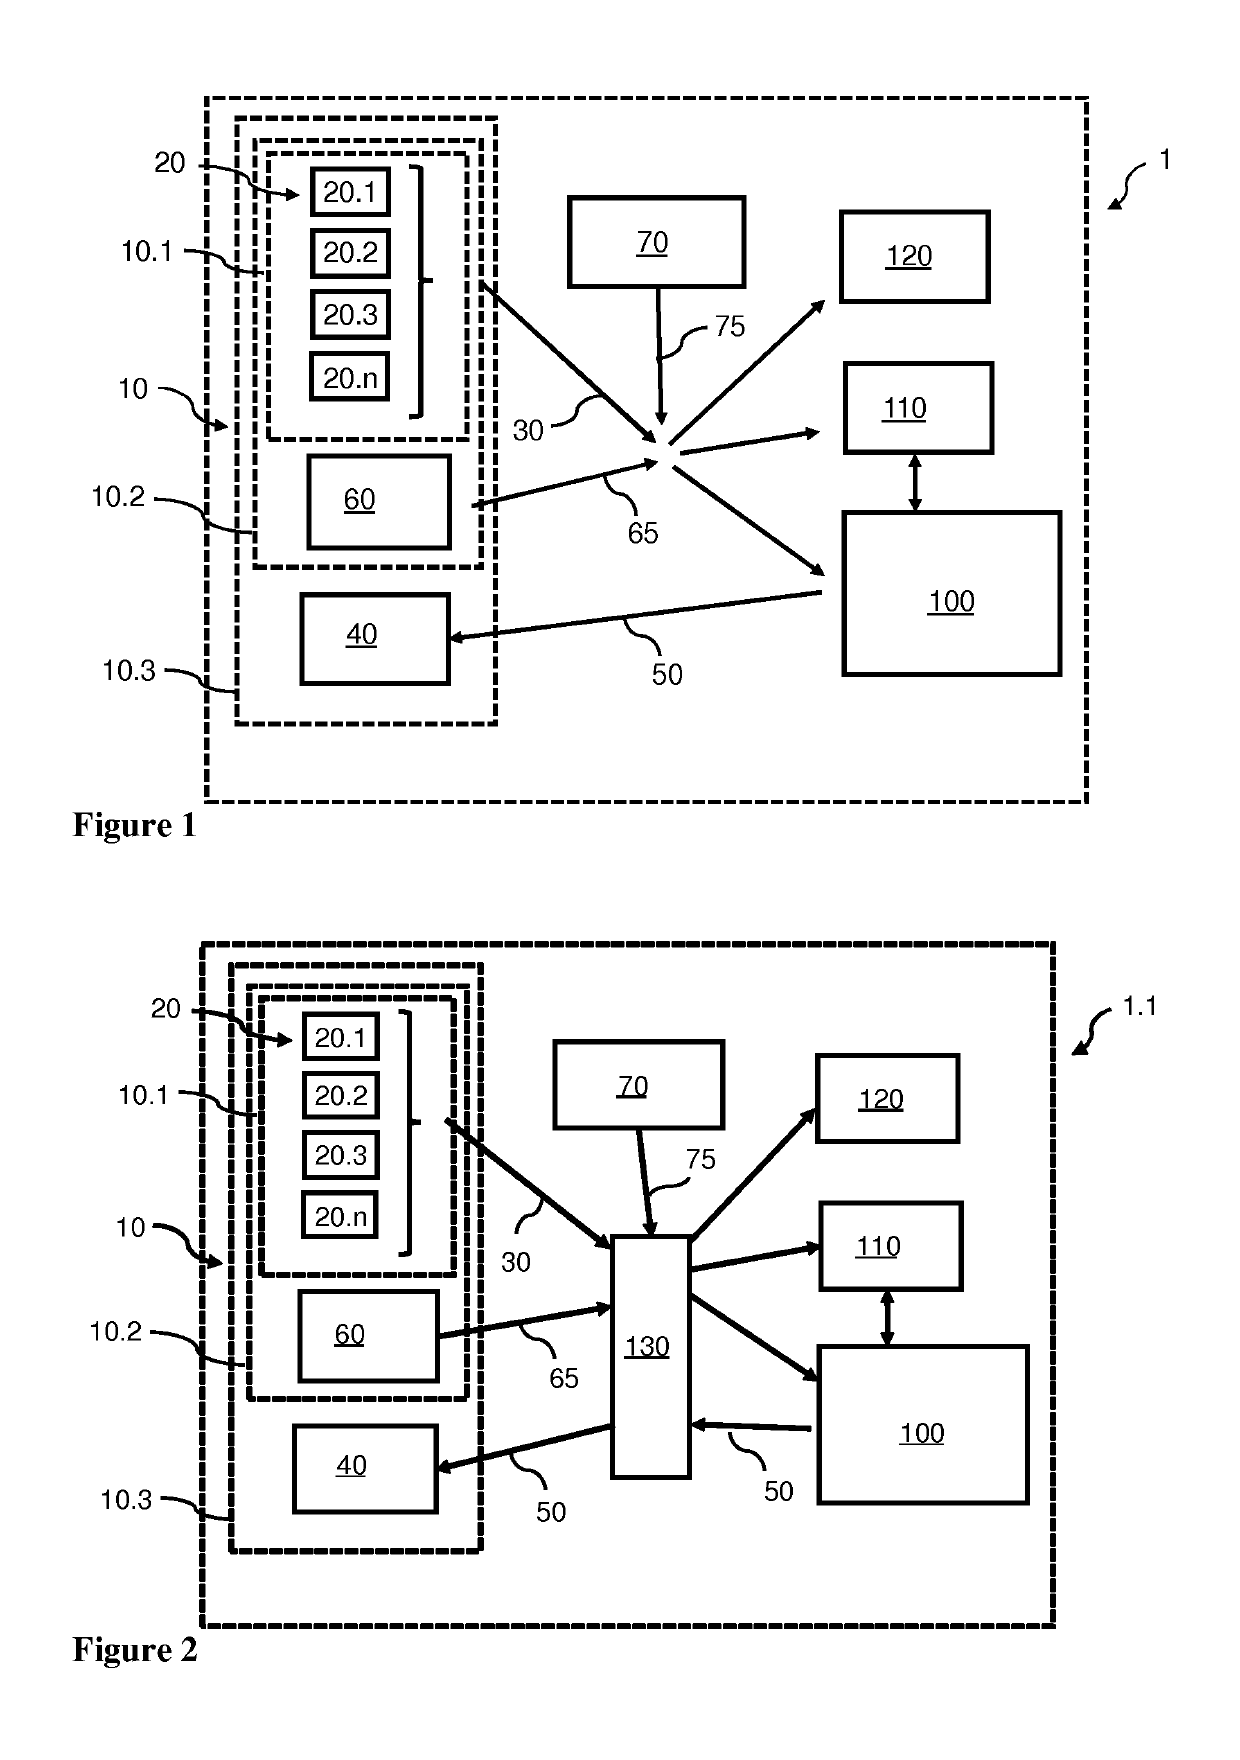 Device, system and method for assessing and improving comfort, health and productivity